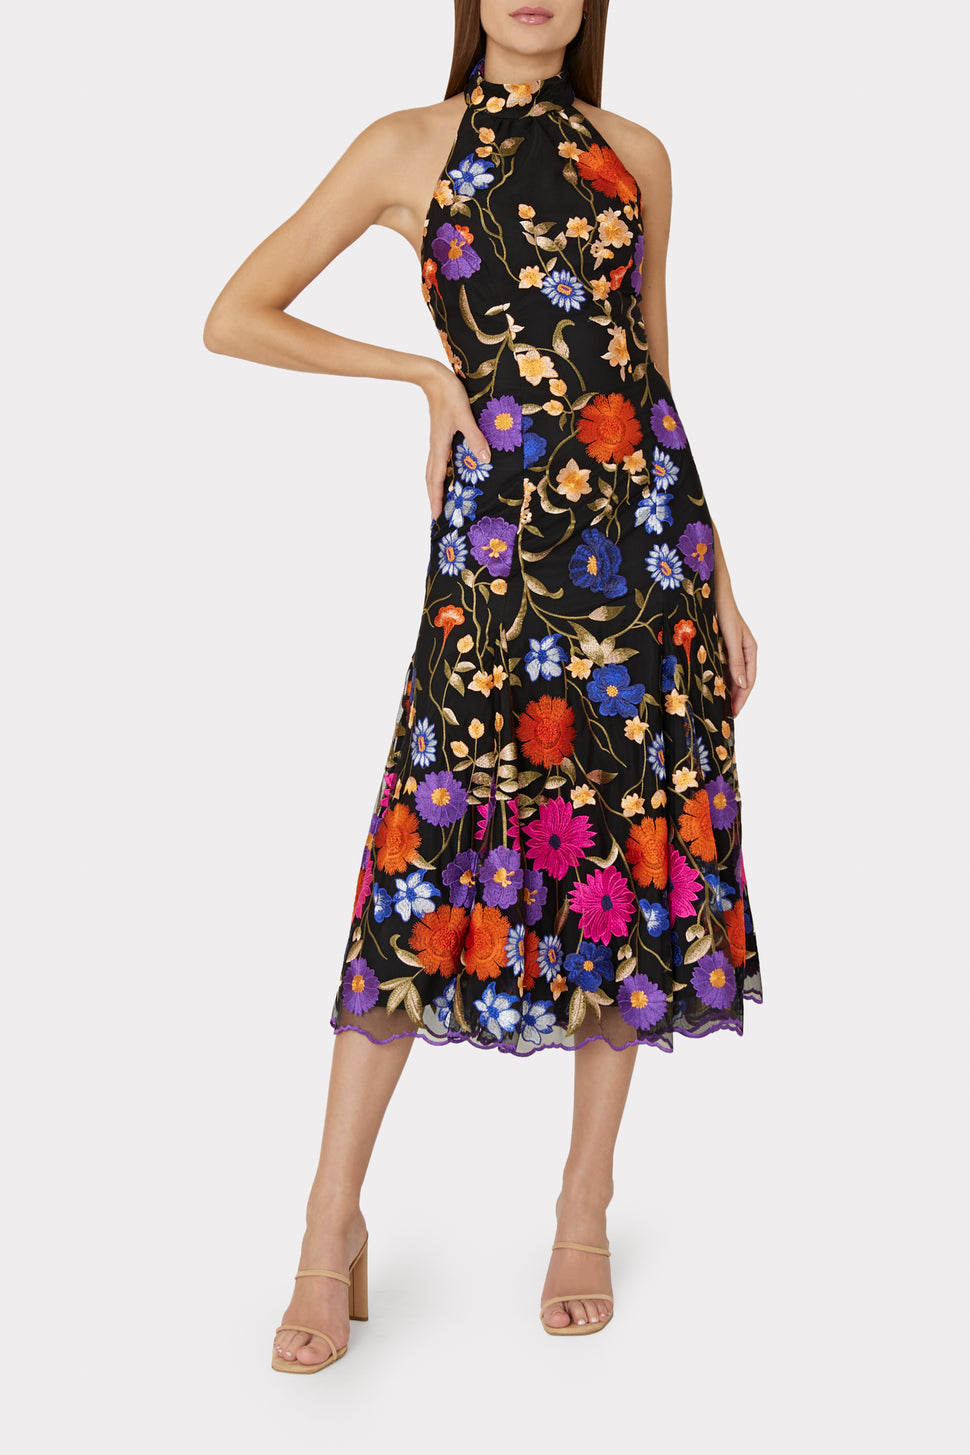 Penelope Fall Foliage Embroidery Dress in Black Multi - MILLY in